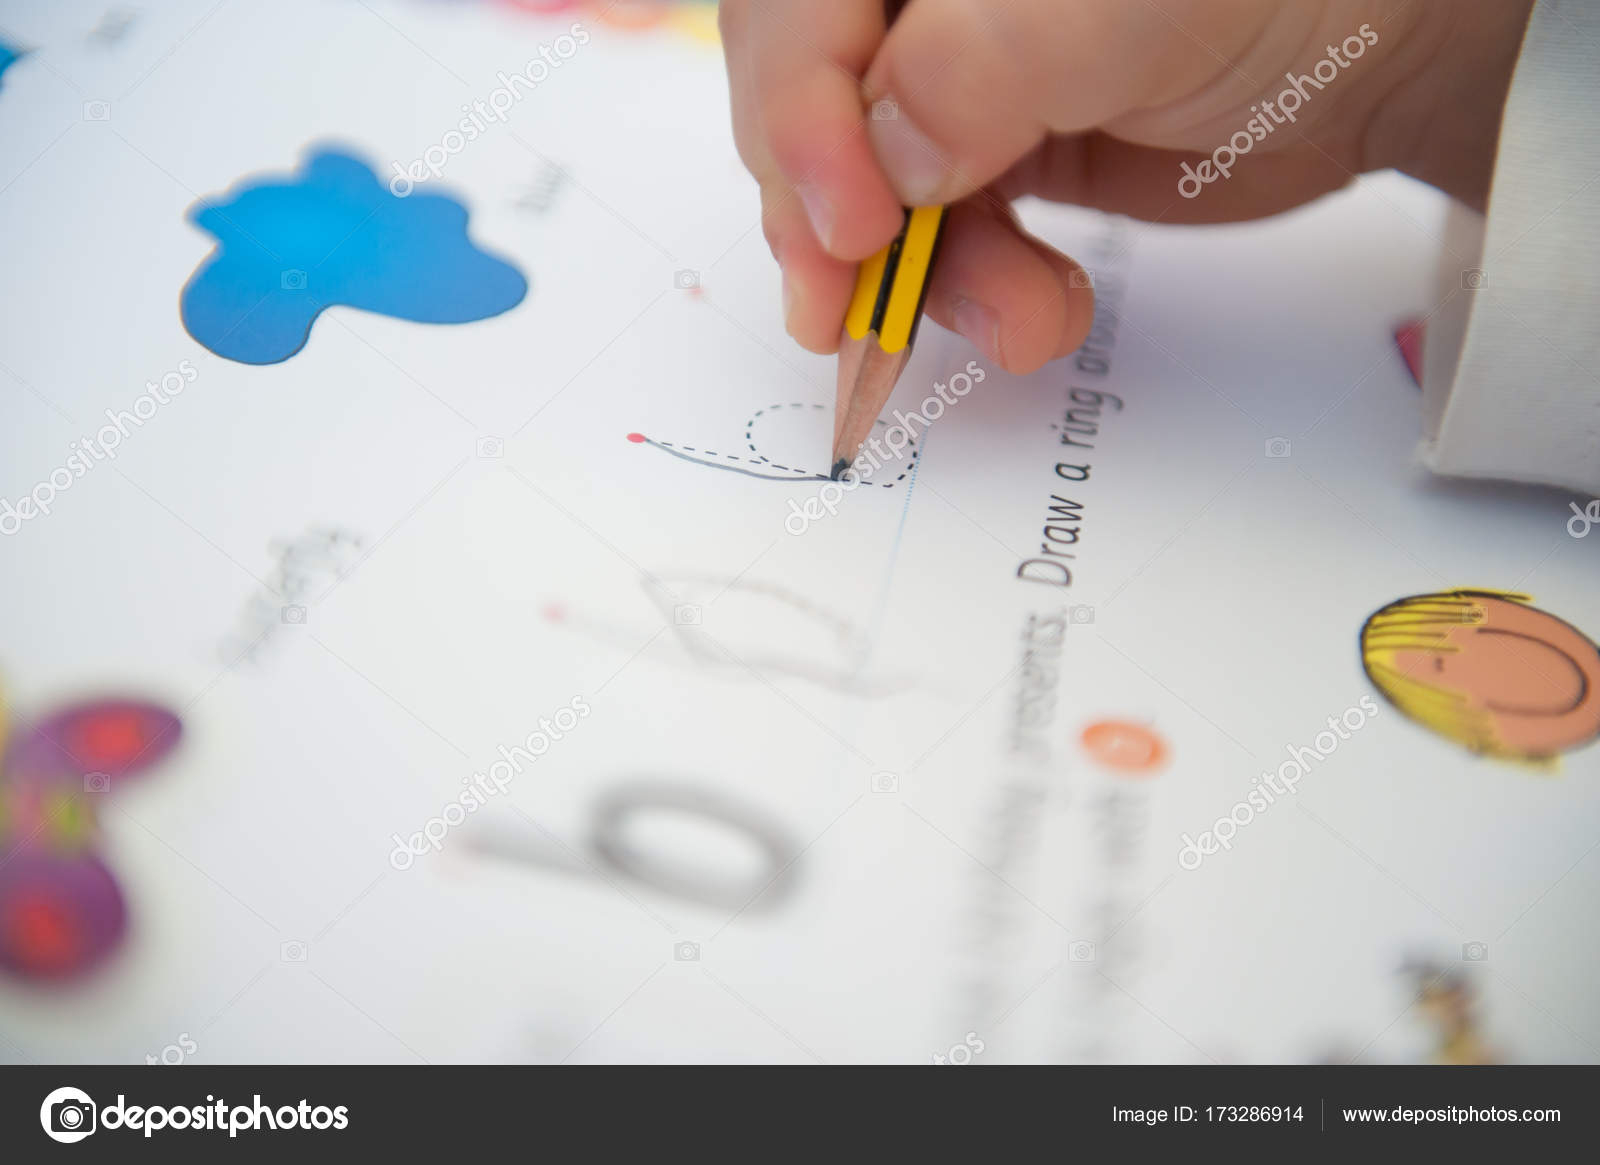 3-Year-Old Child Is Learning To Writetracing Alphabet with regard to 3 Year Old Tracing Letters